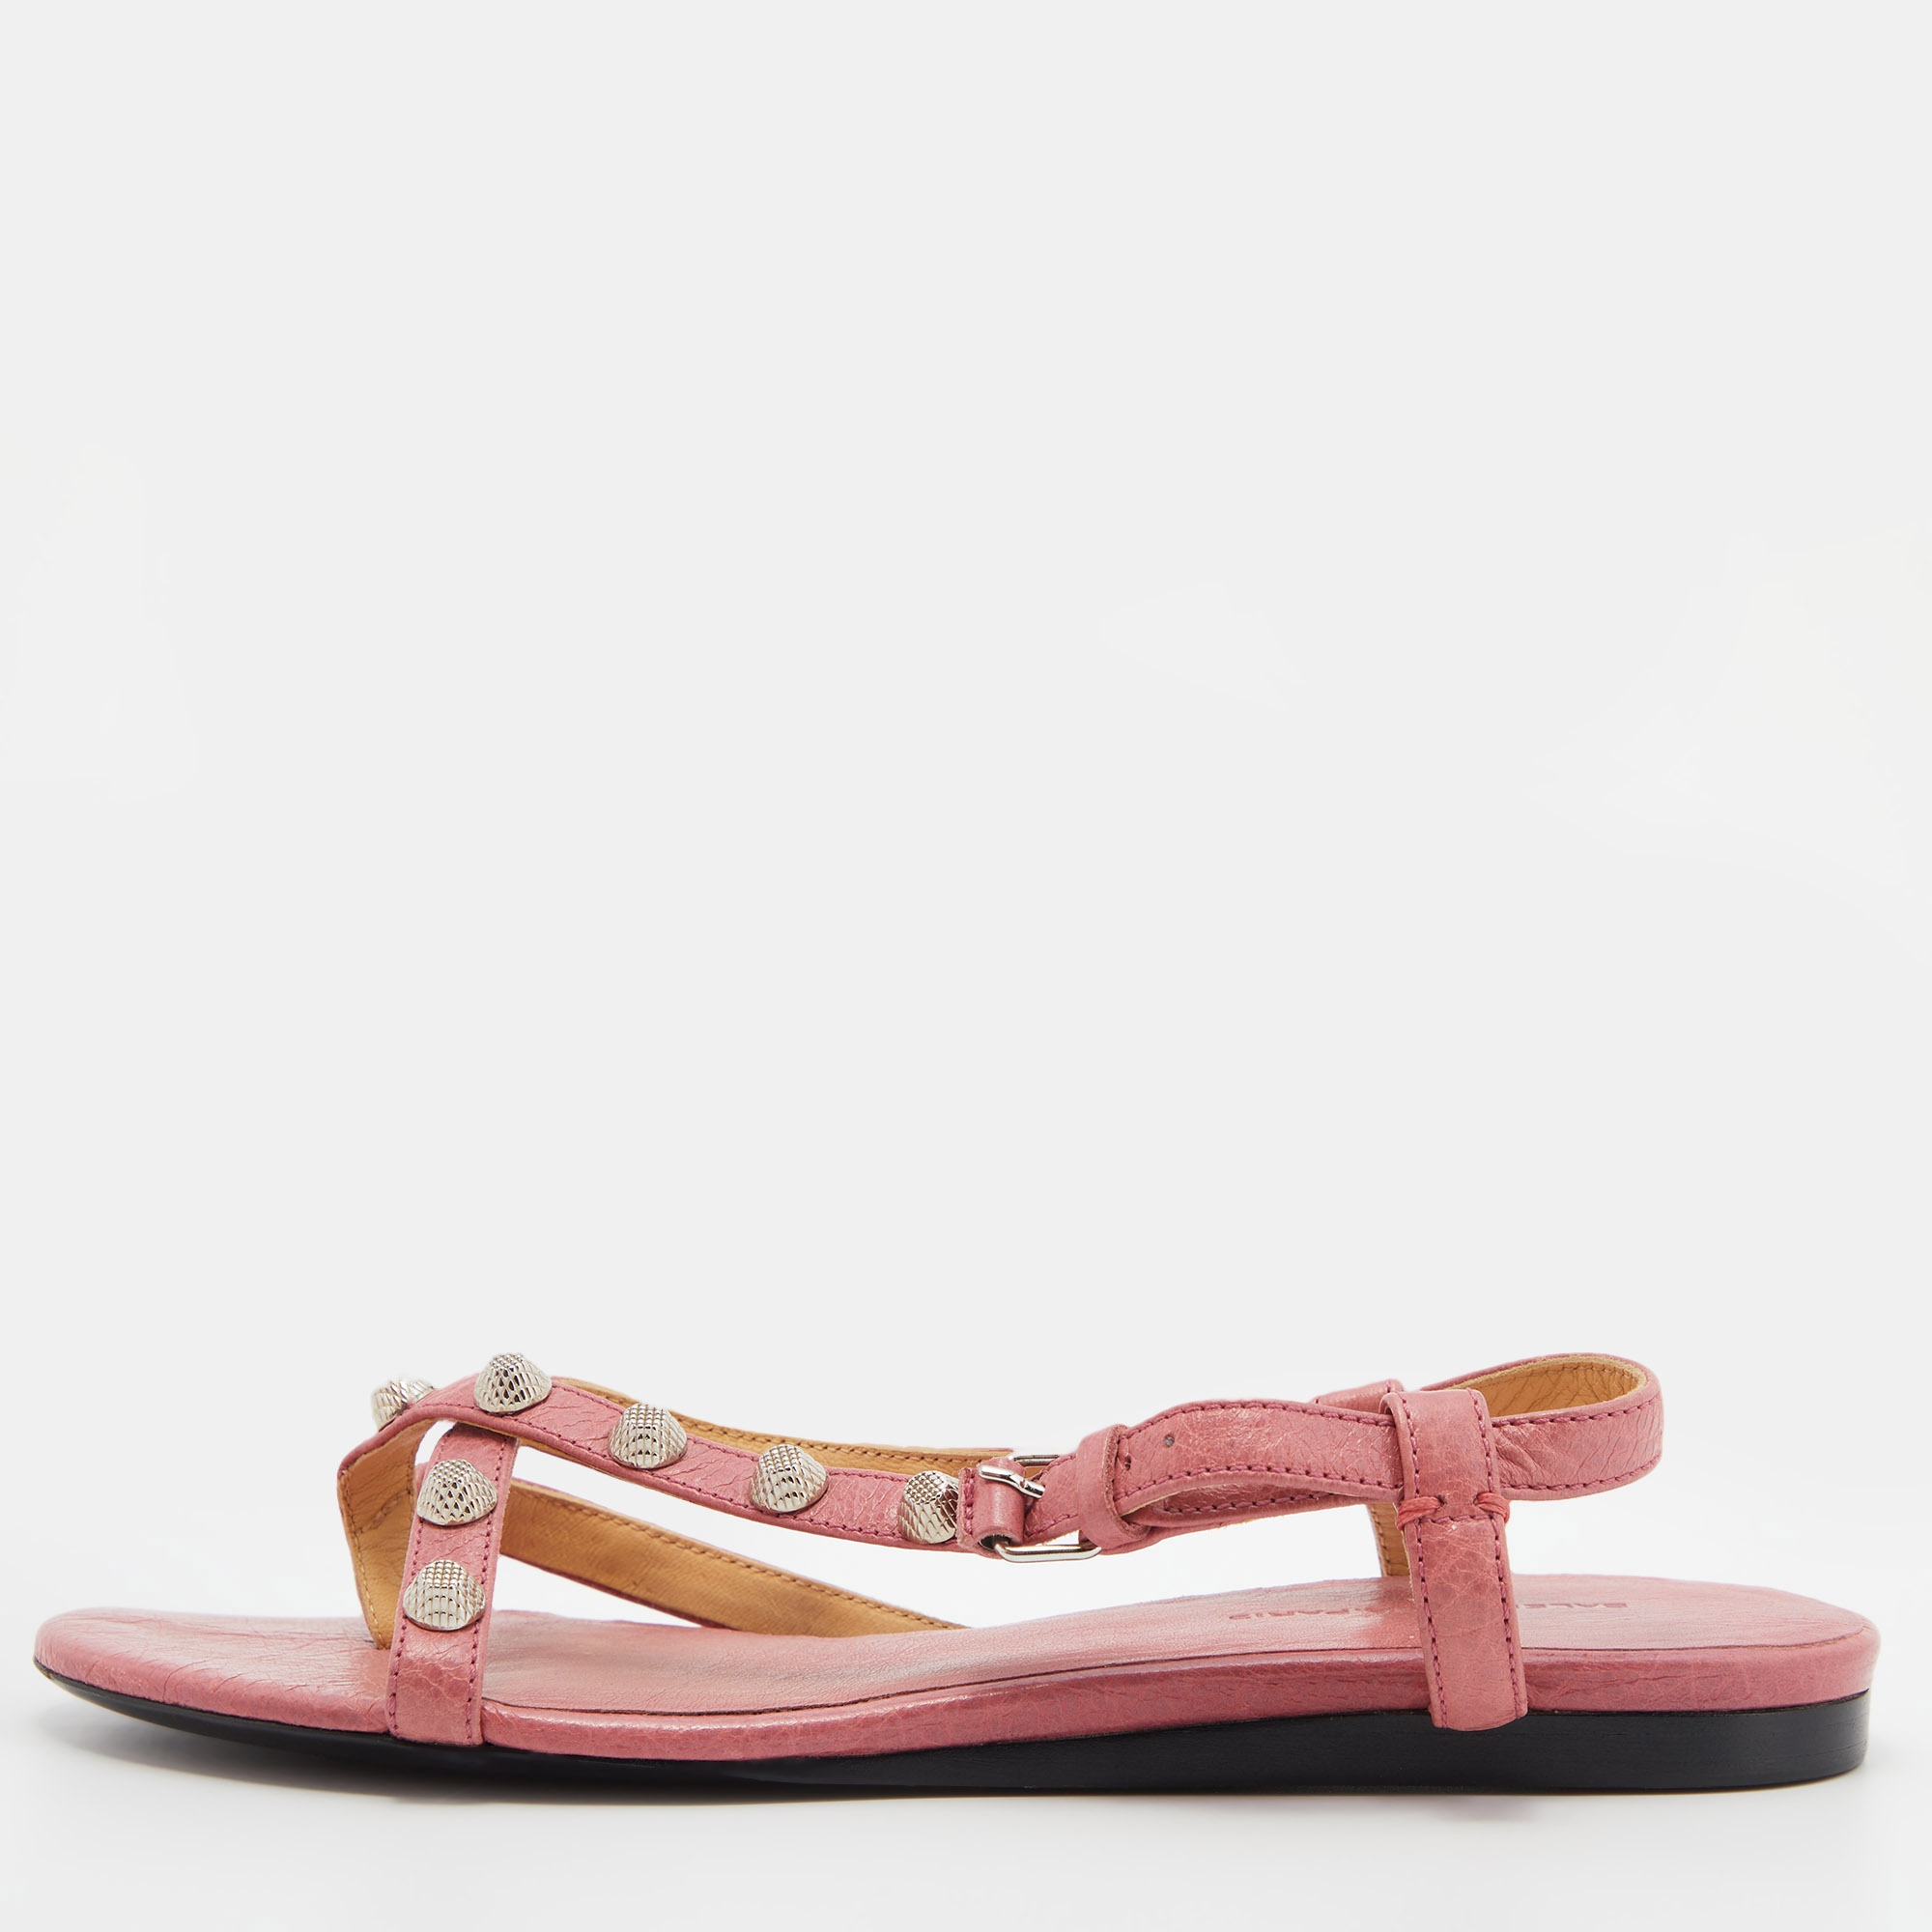 Pre-owned Balenciaga Pink Leather Arena Flat Sandals Size 36